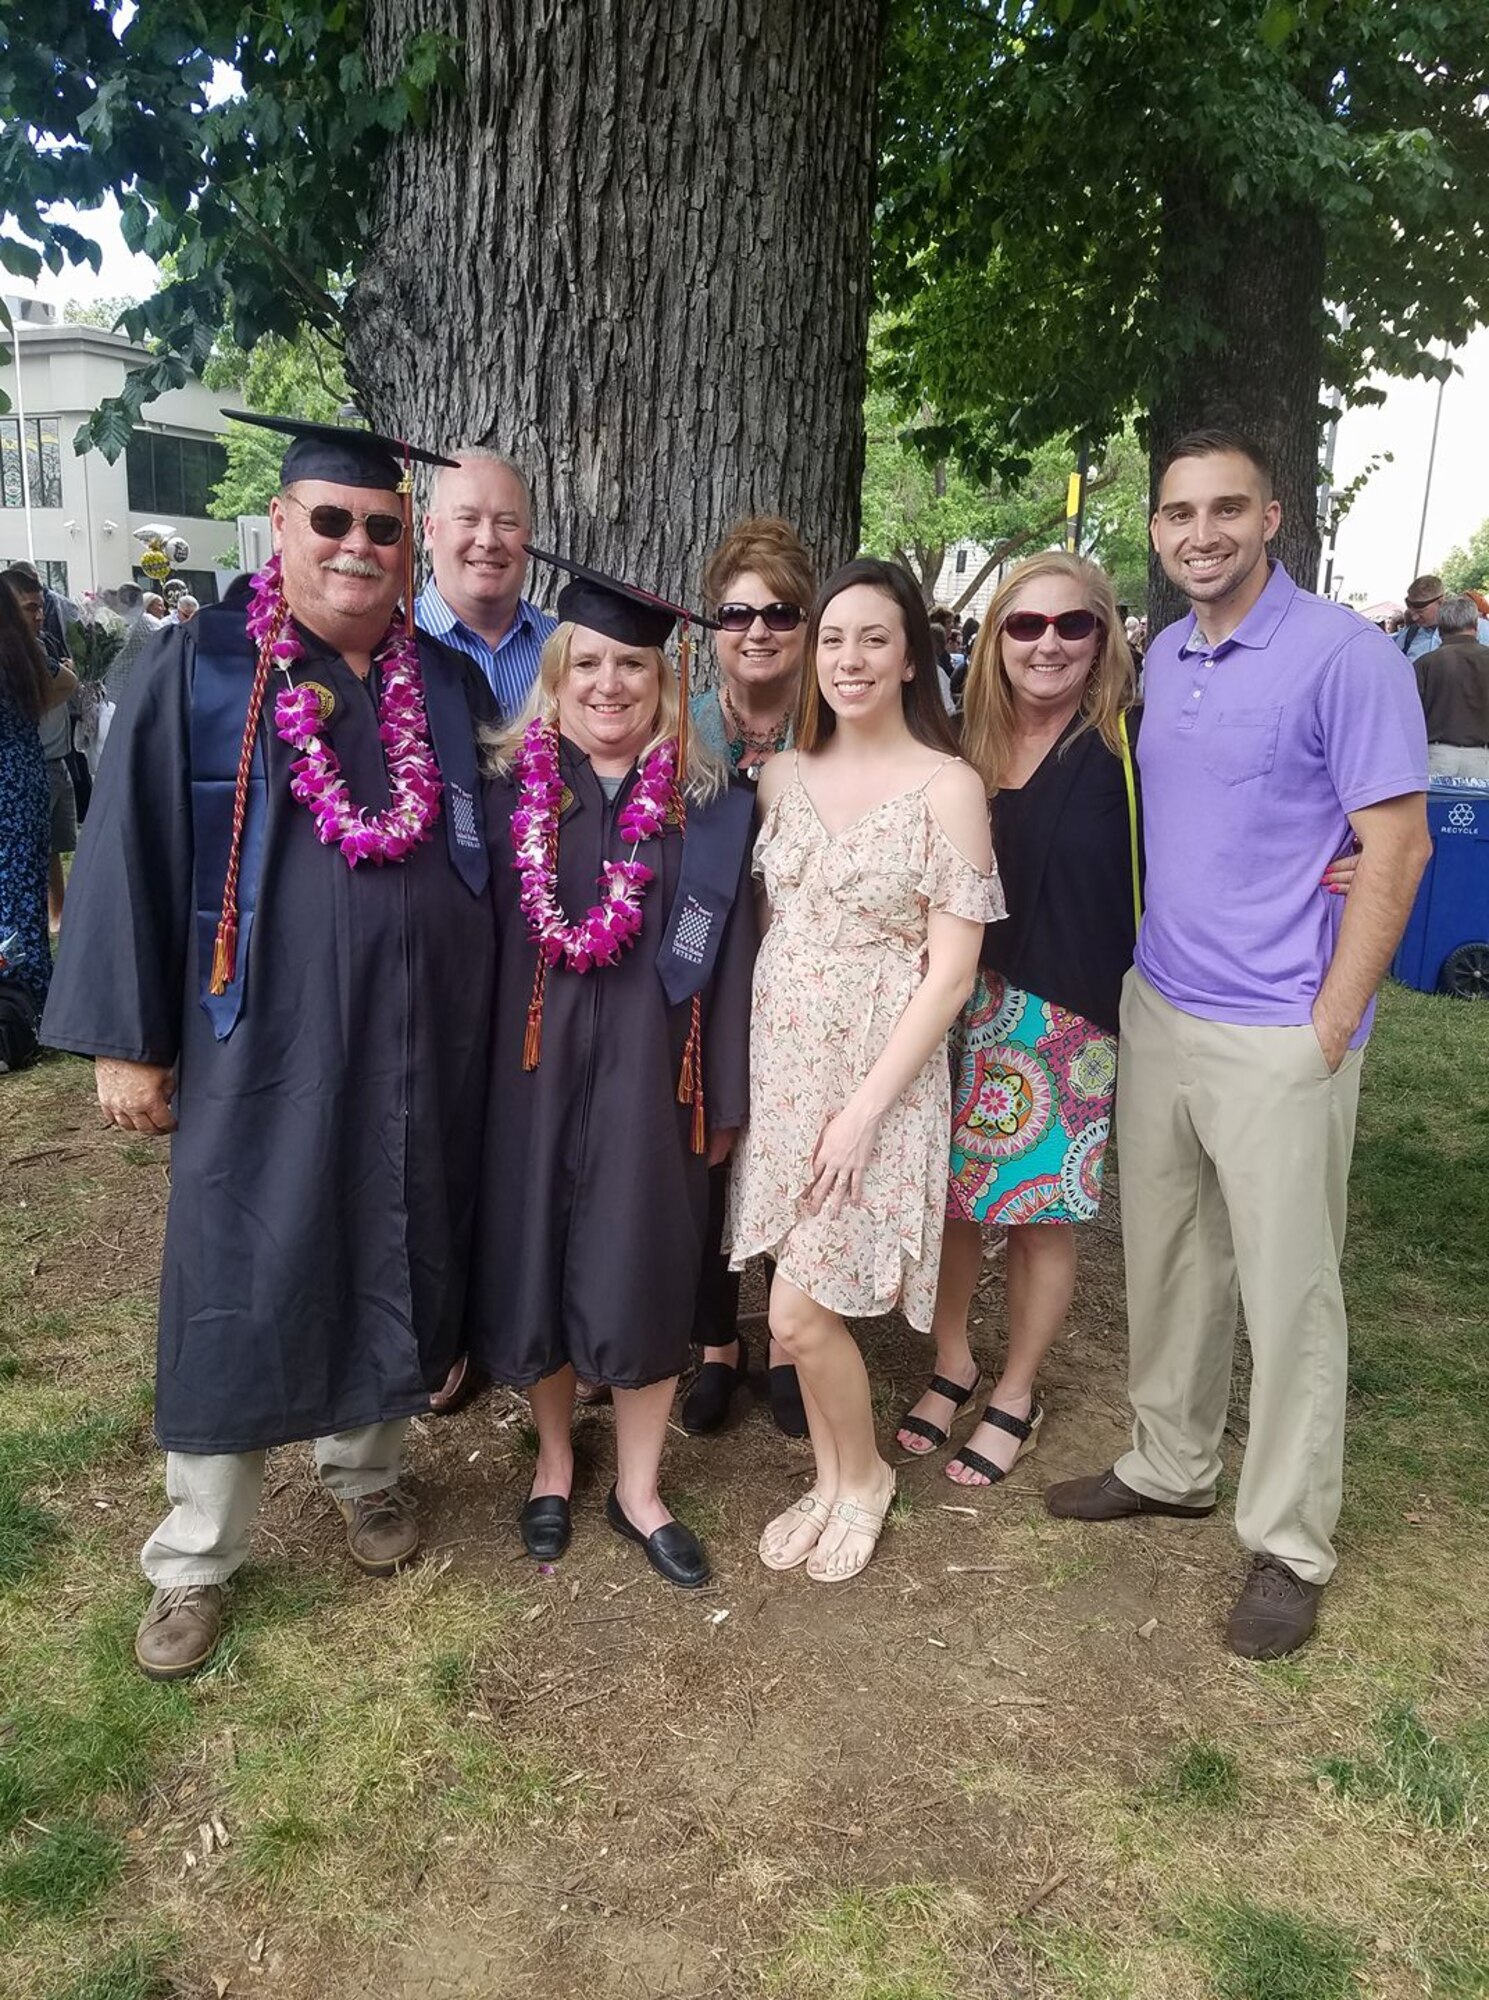 Kevin Edwards, 60th Aerial Port Squadron, and Debbie Edwards, stand with family after graduating from Brandman University in Sacramento, June 3, 2017. The couple decided to go back to school in October 2014 and completed their Bachelor of Arts degrees in business administration with honors. (Courtesy photo)